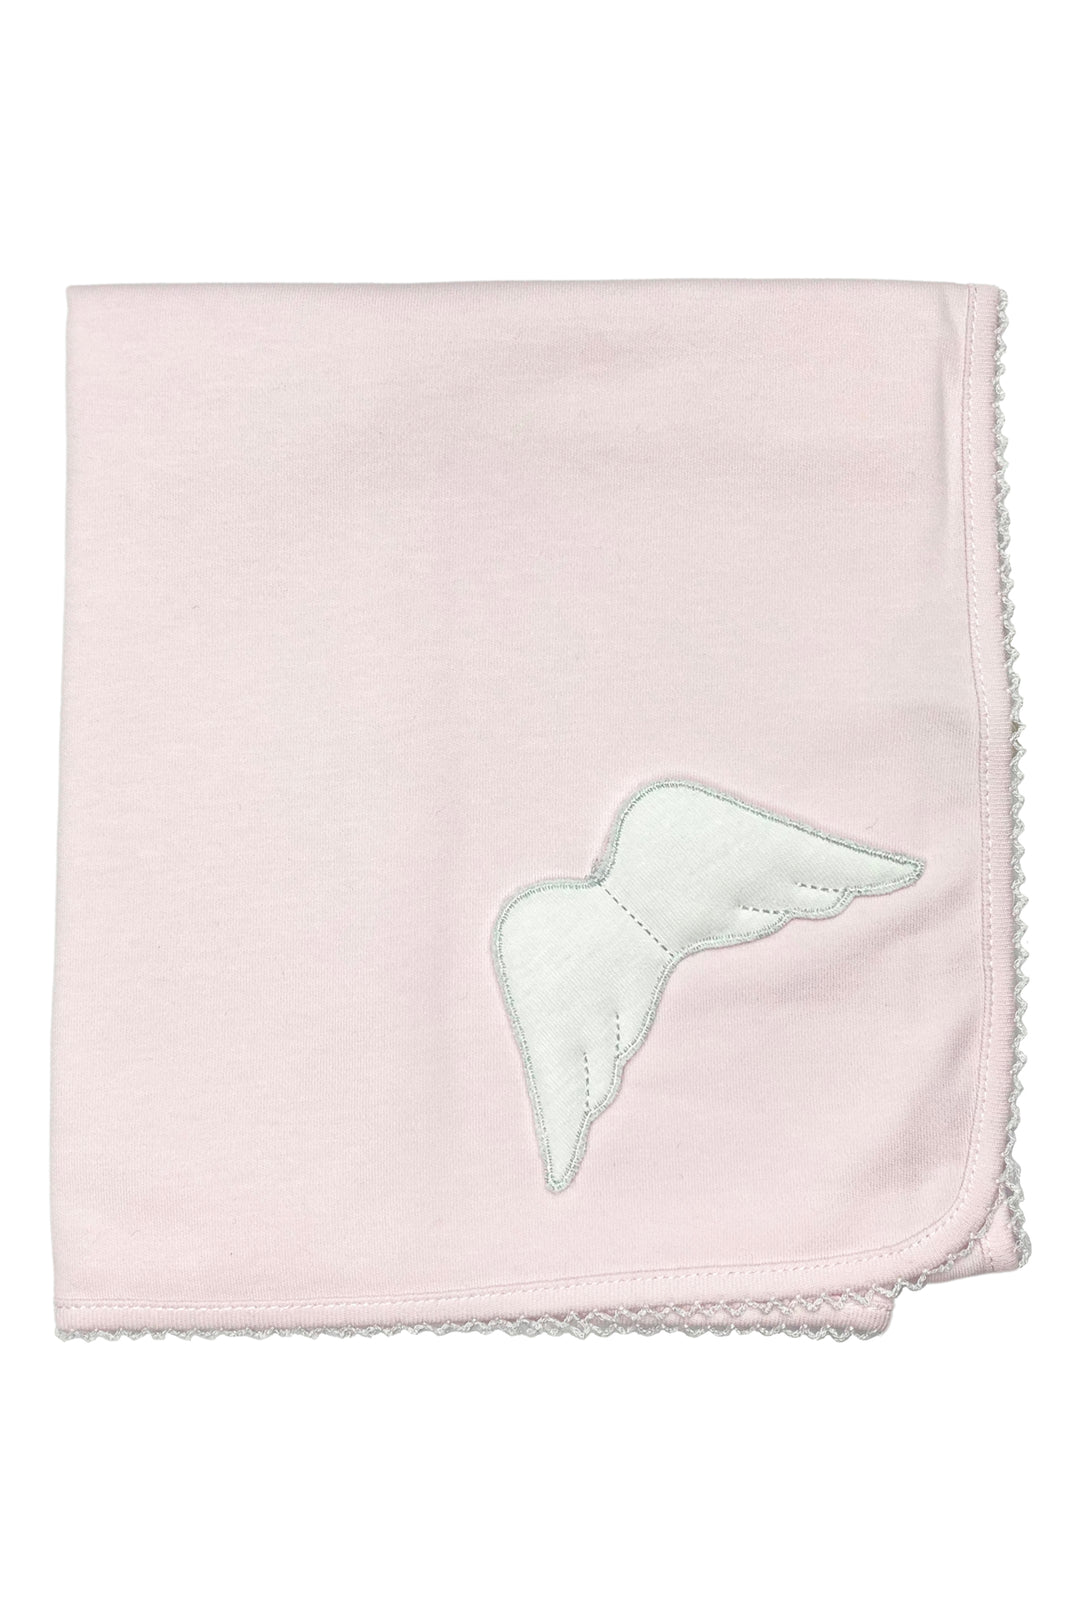 Baby Gi Angel Wing Cotton Blanket | Millie and John